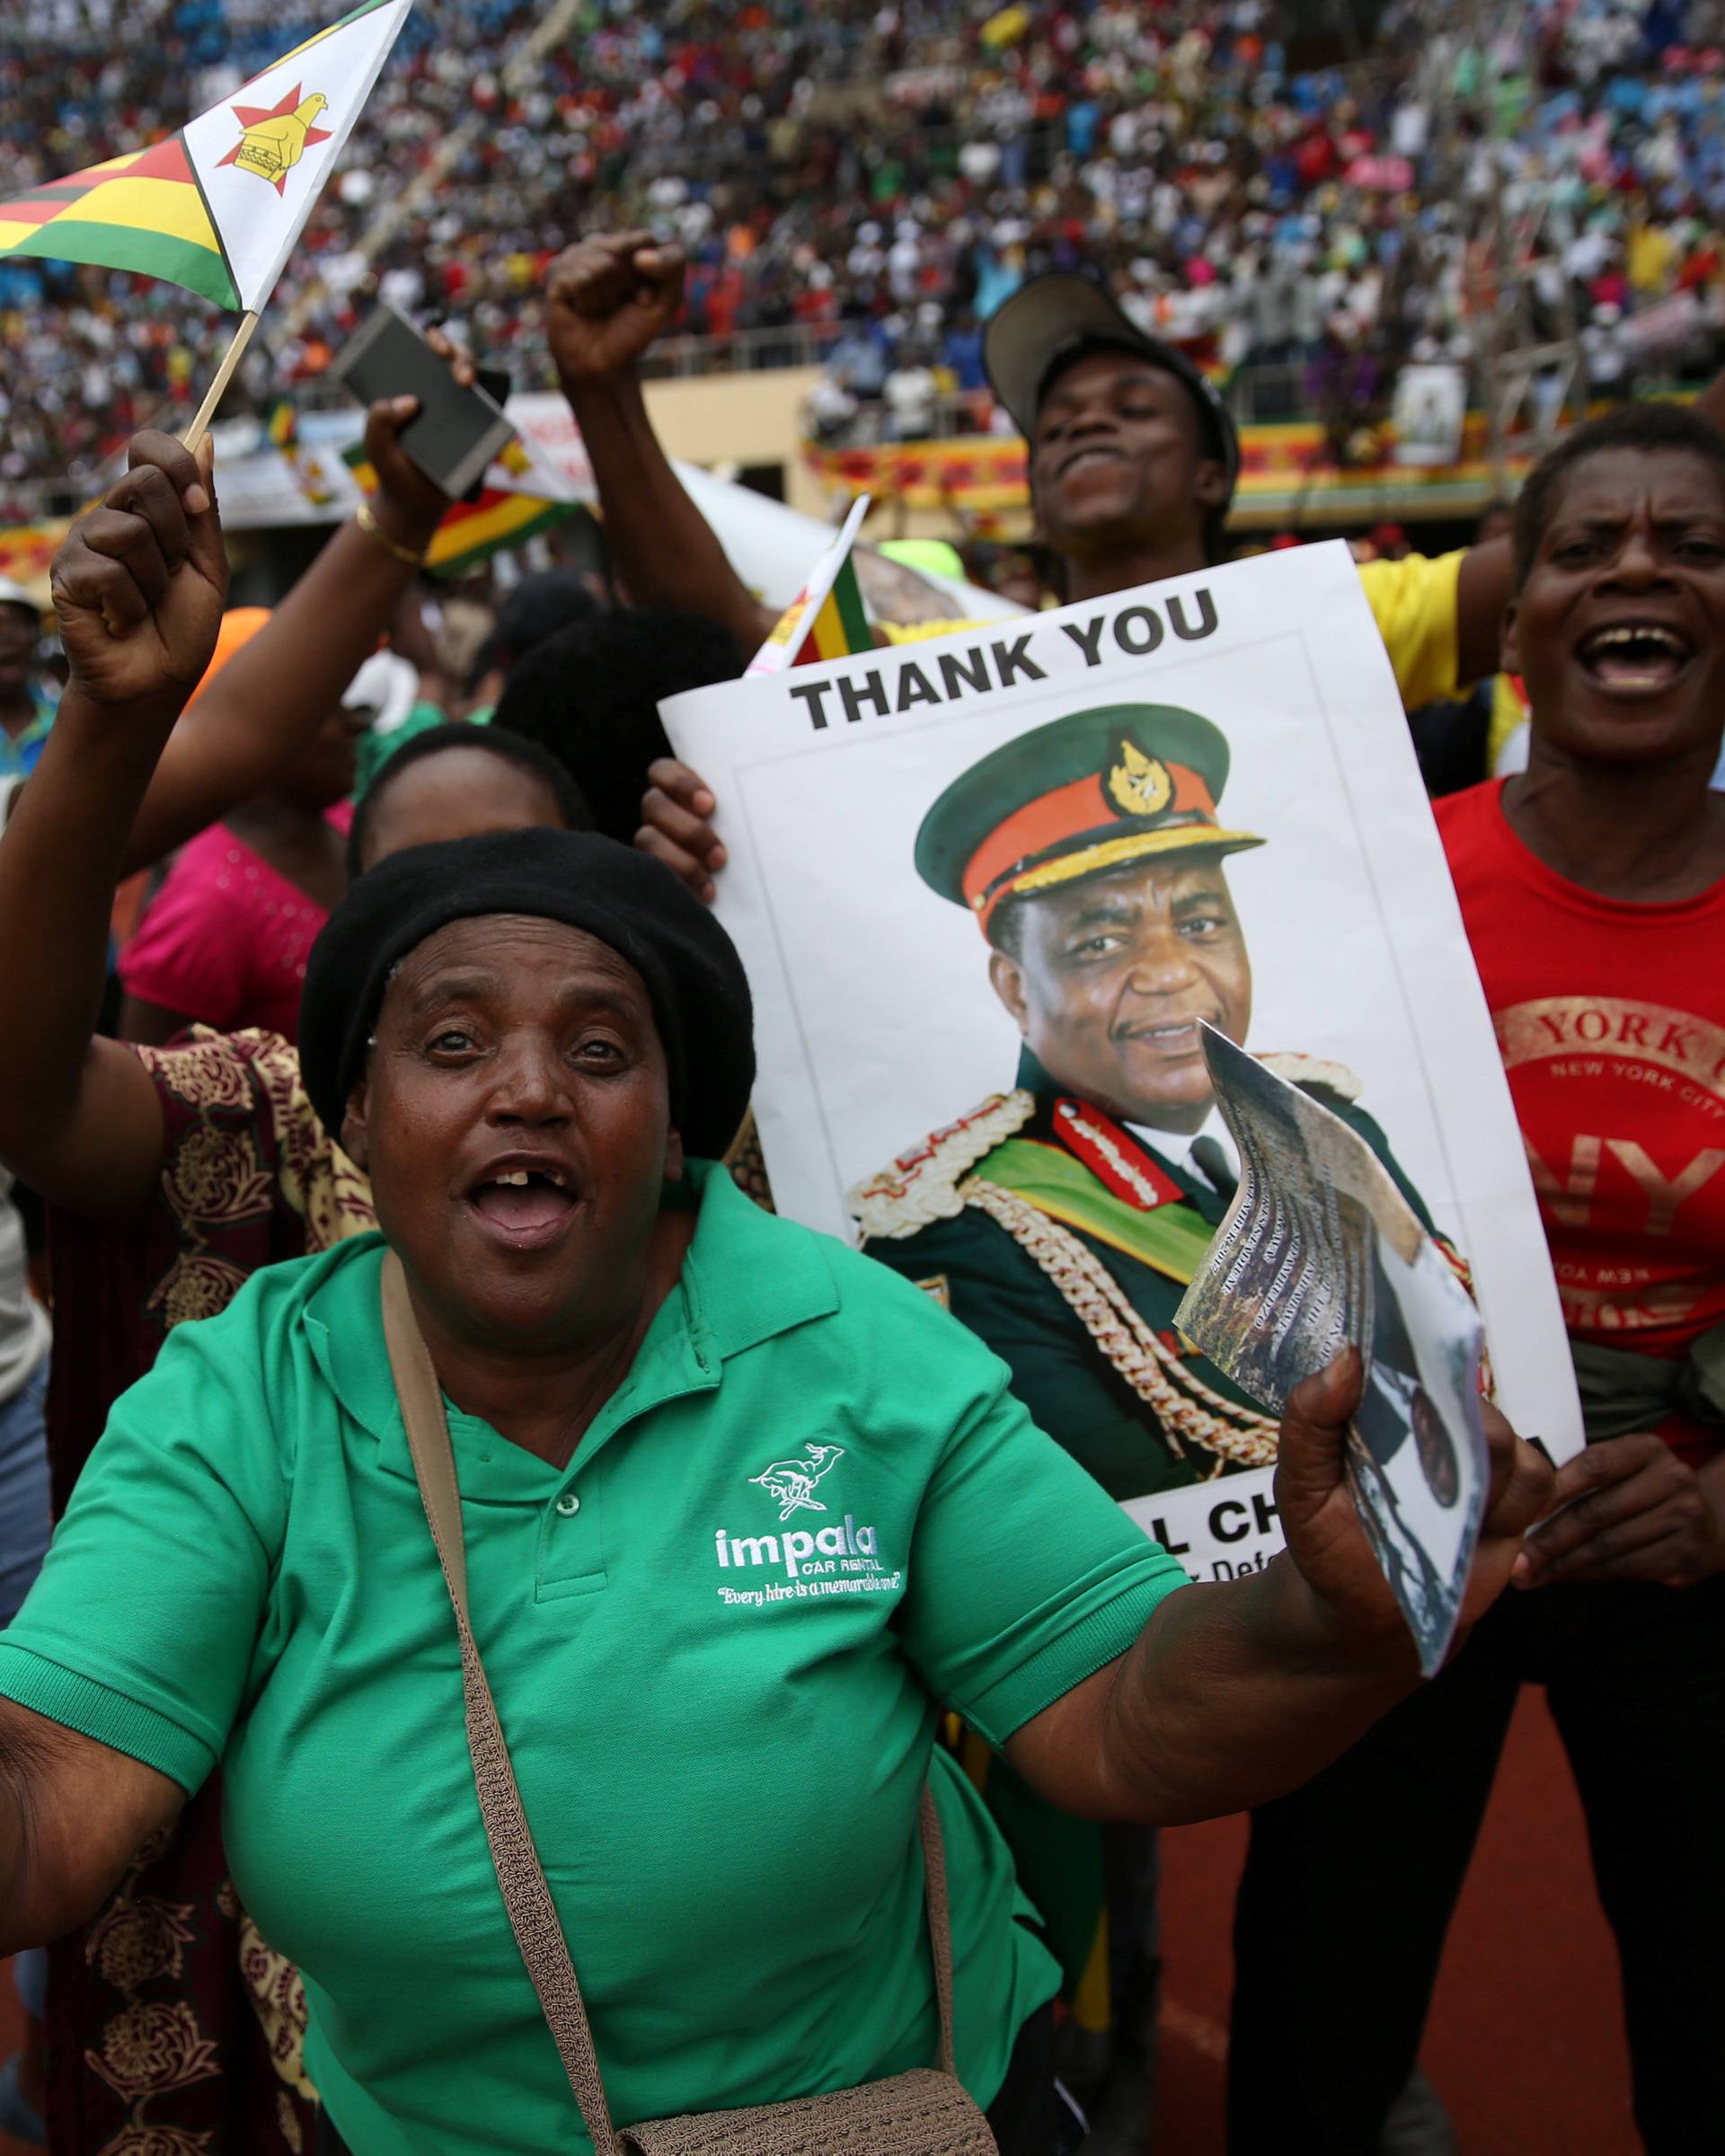 People cheer as Emmerson Mnangagwa is sworn in as Zimbabwe's president in Harare, Zimbabwe